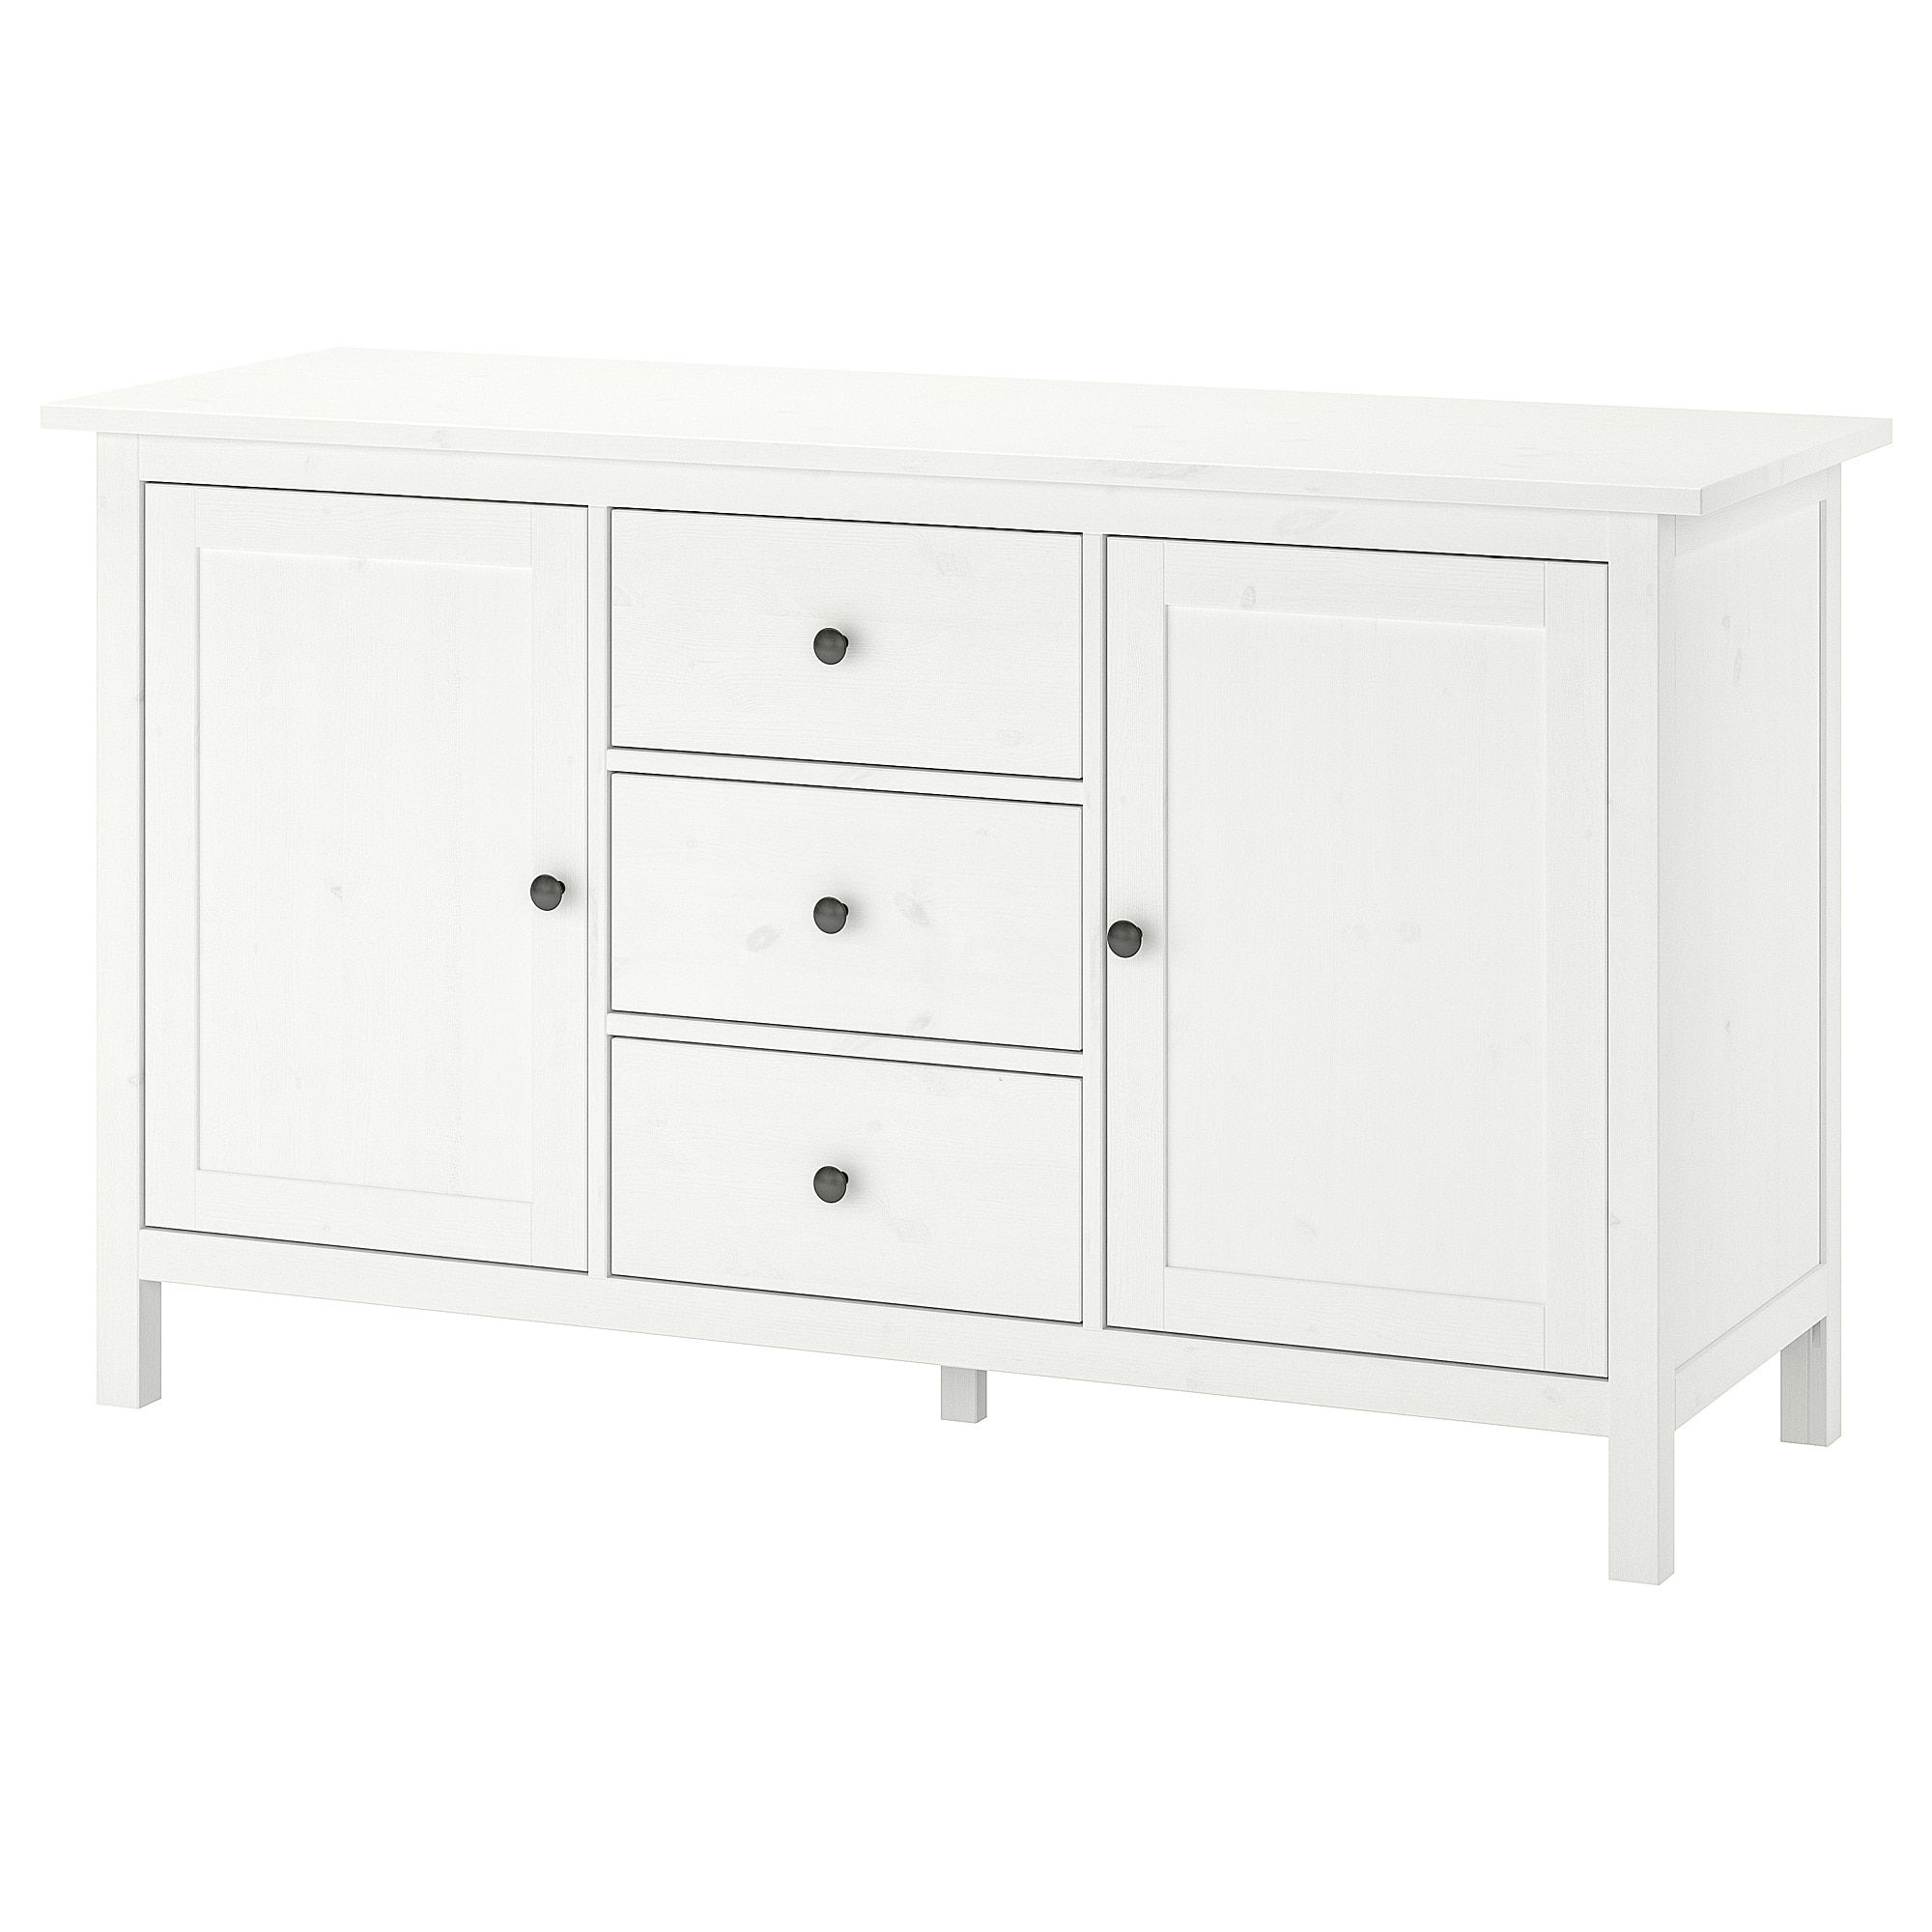 Hemnes Sideboard, White Stain Intended For Most Recently Released North York Sideboards (View 8 of 20)